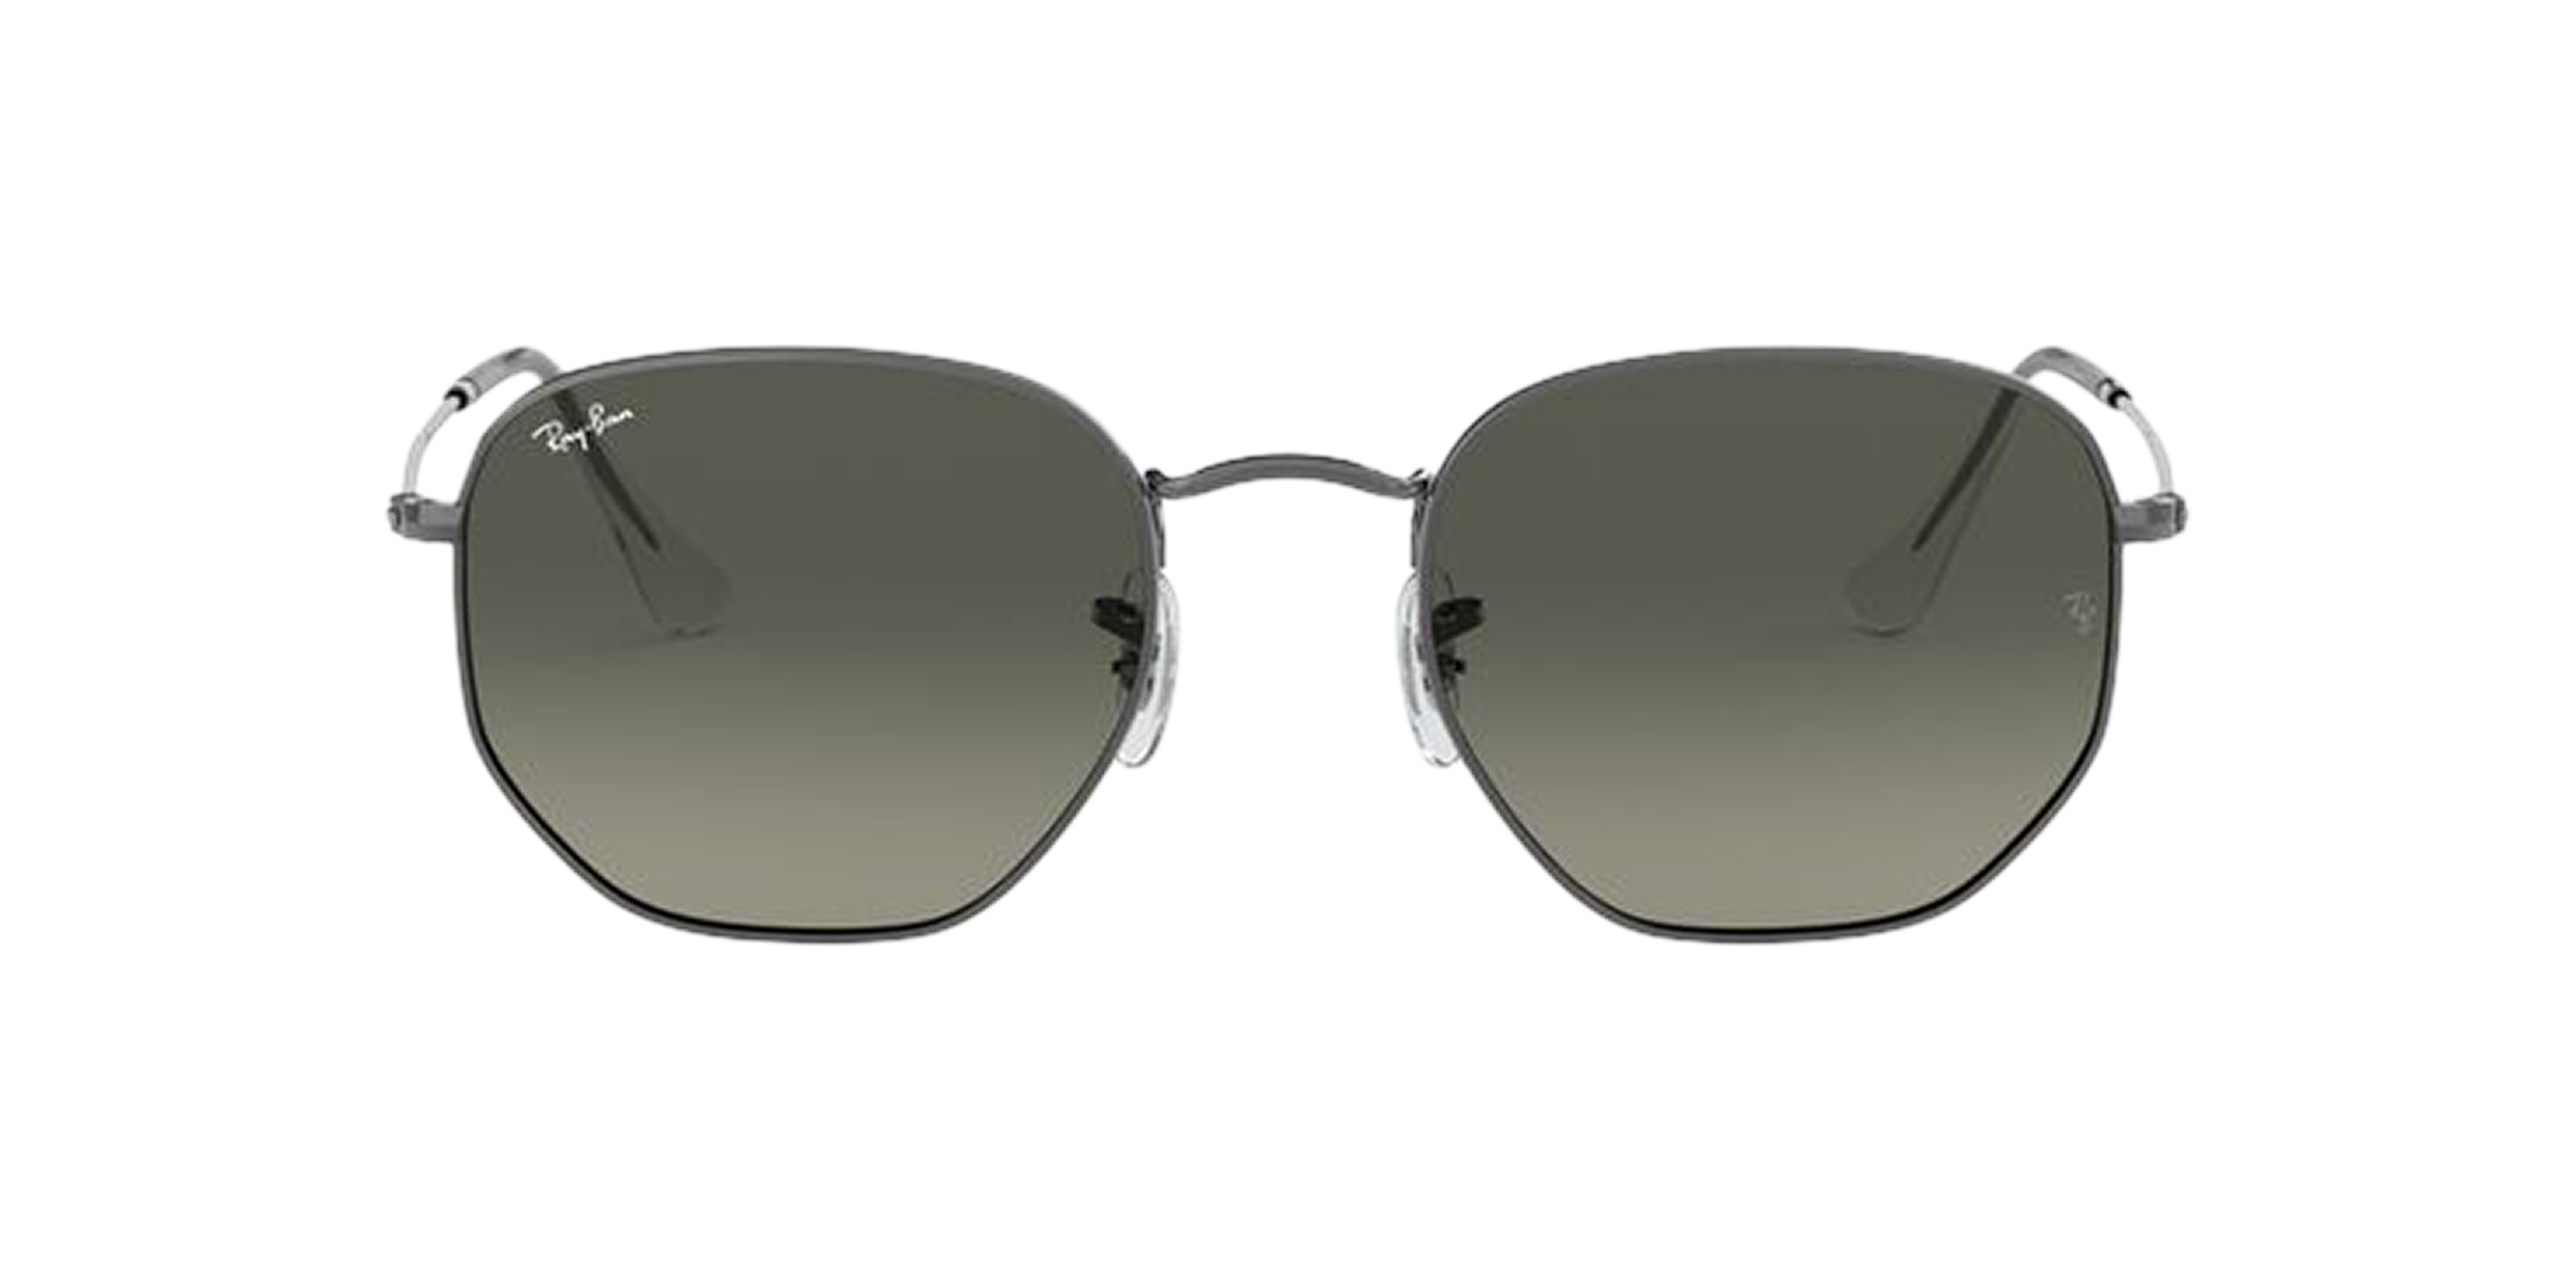 [products.image.front] RAY-BAN RB3548N 004/71